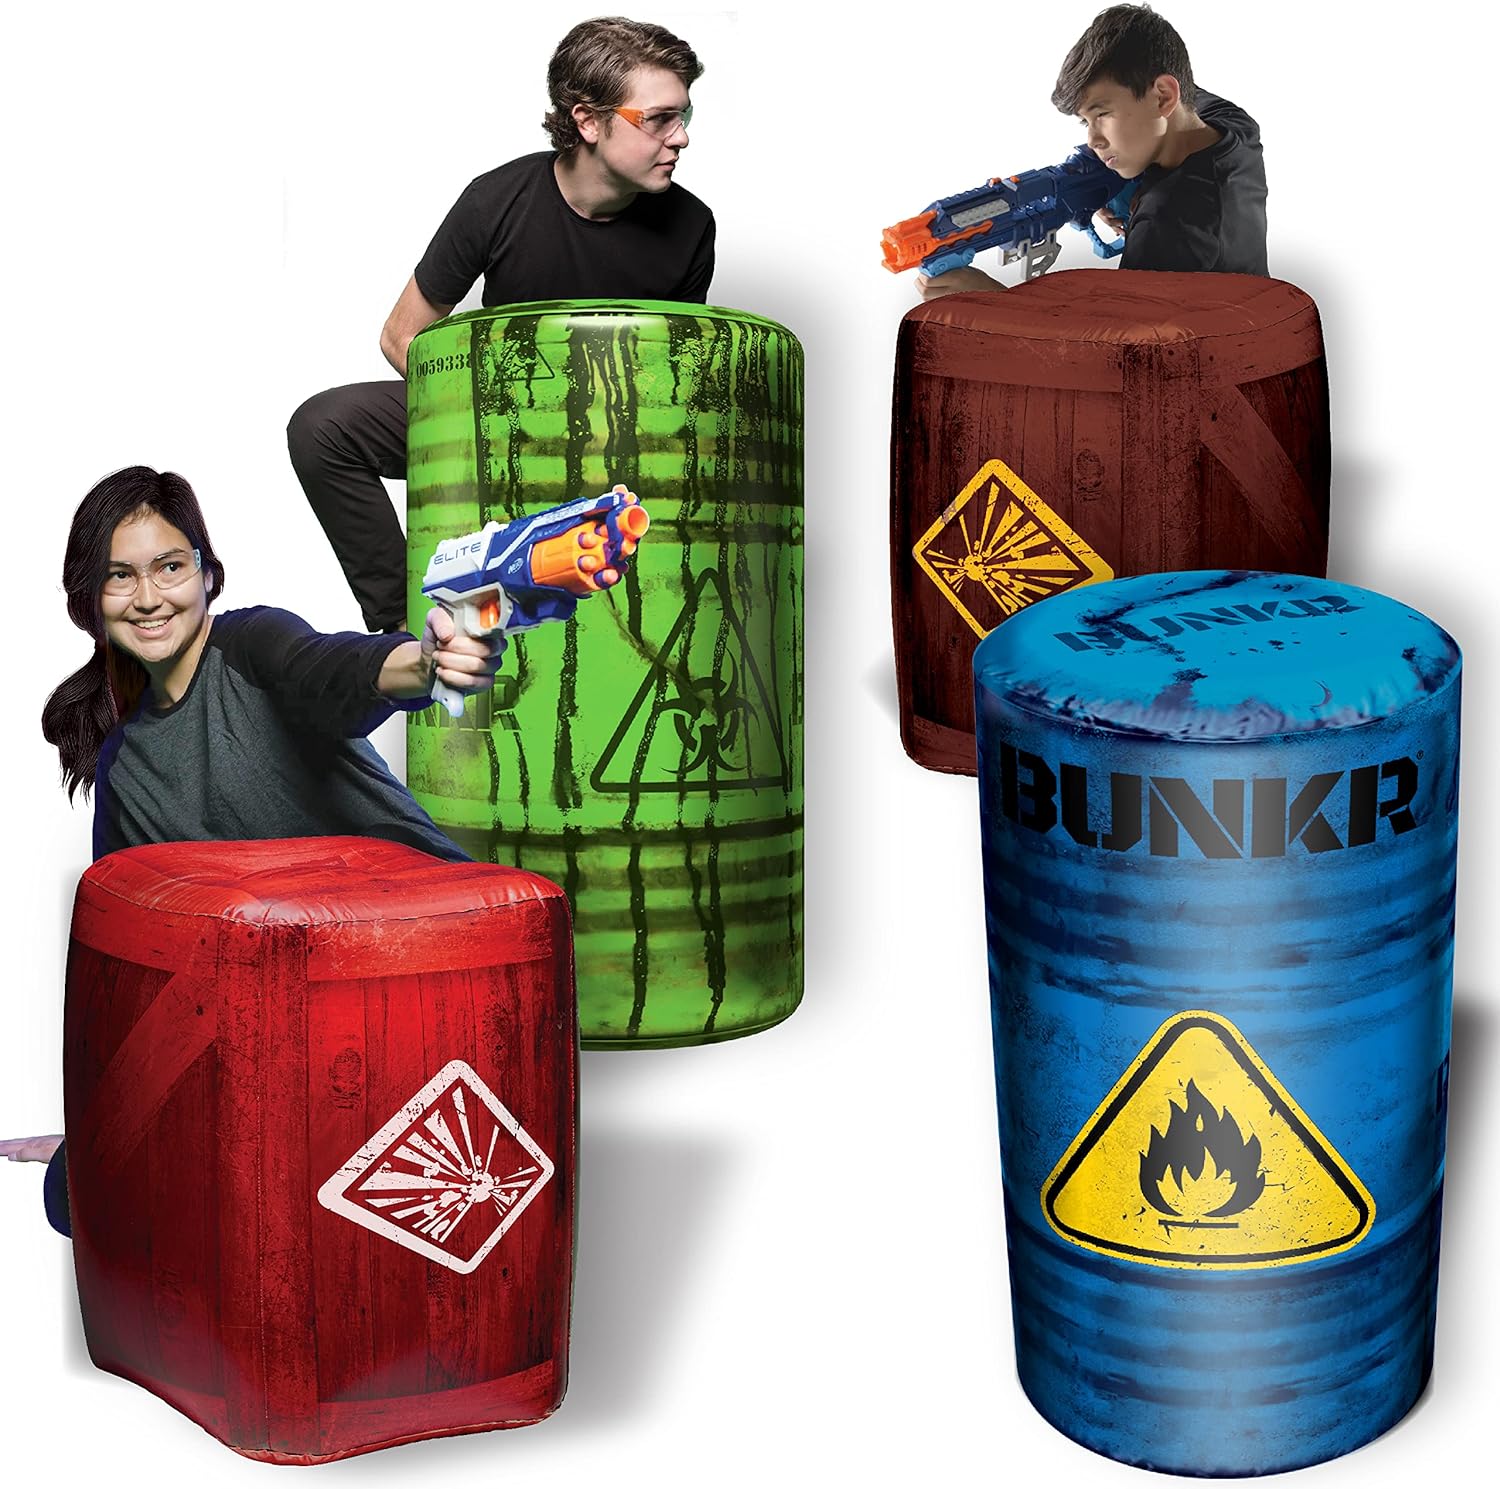 BUNKR BattleZones Battle Royale Inflatable Bunker Fort - 4 Piece Barricade Shield Set Crates and Barrels - Perfect for NERF Party